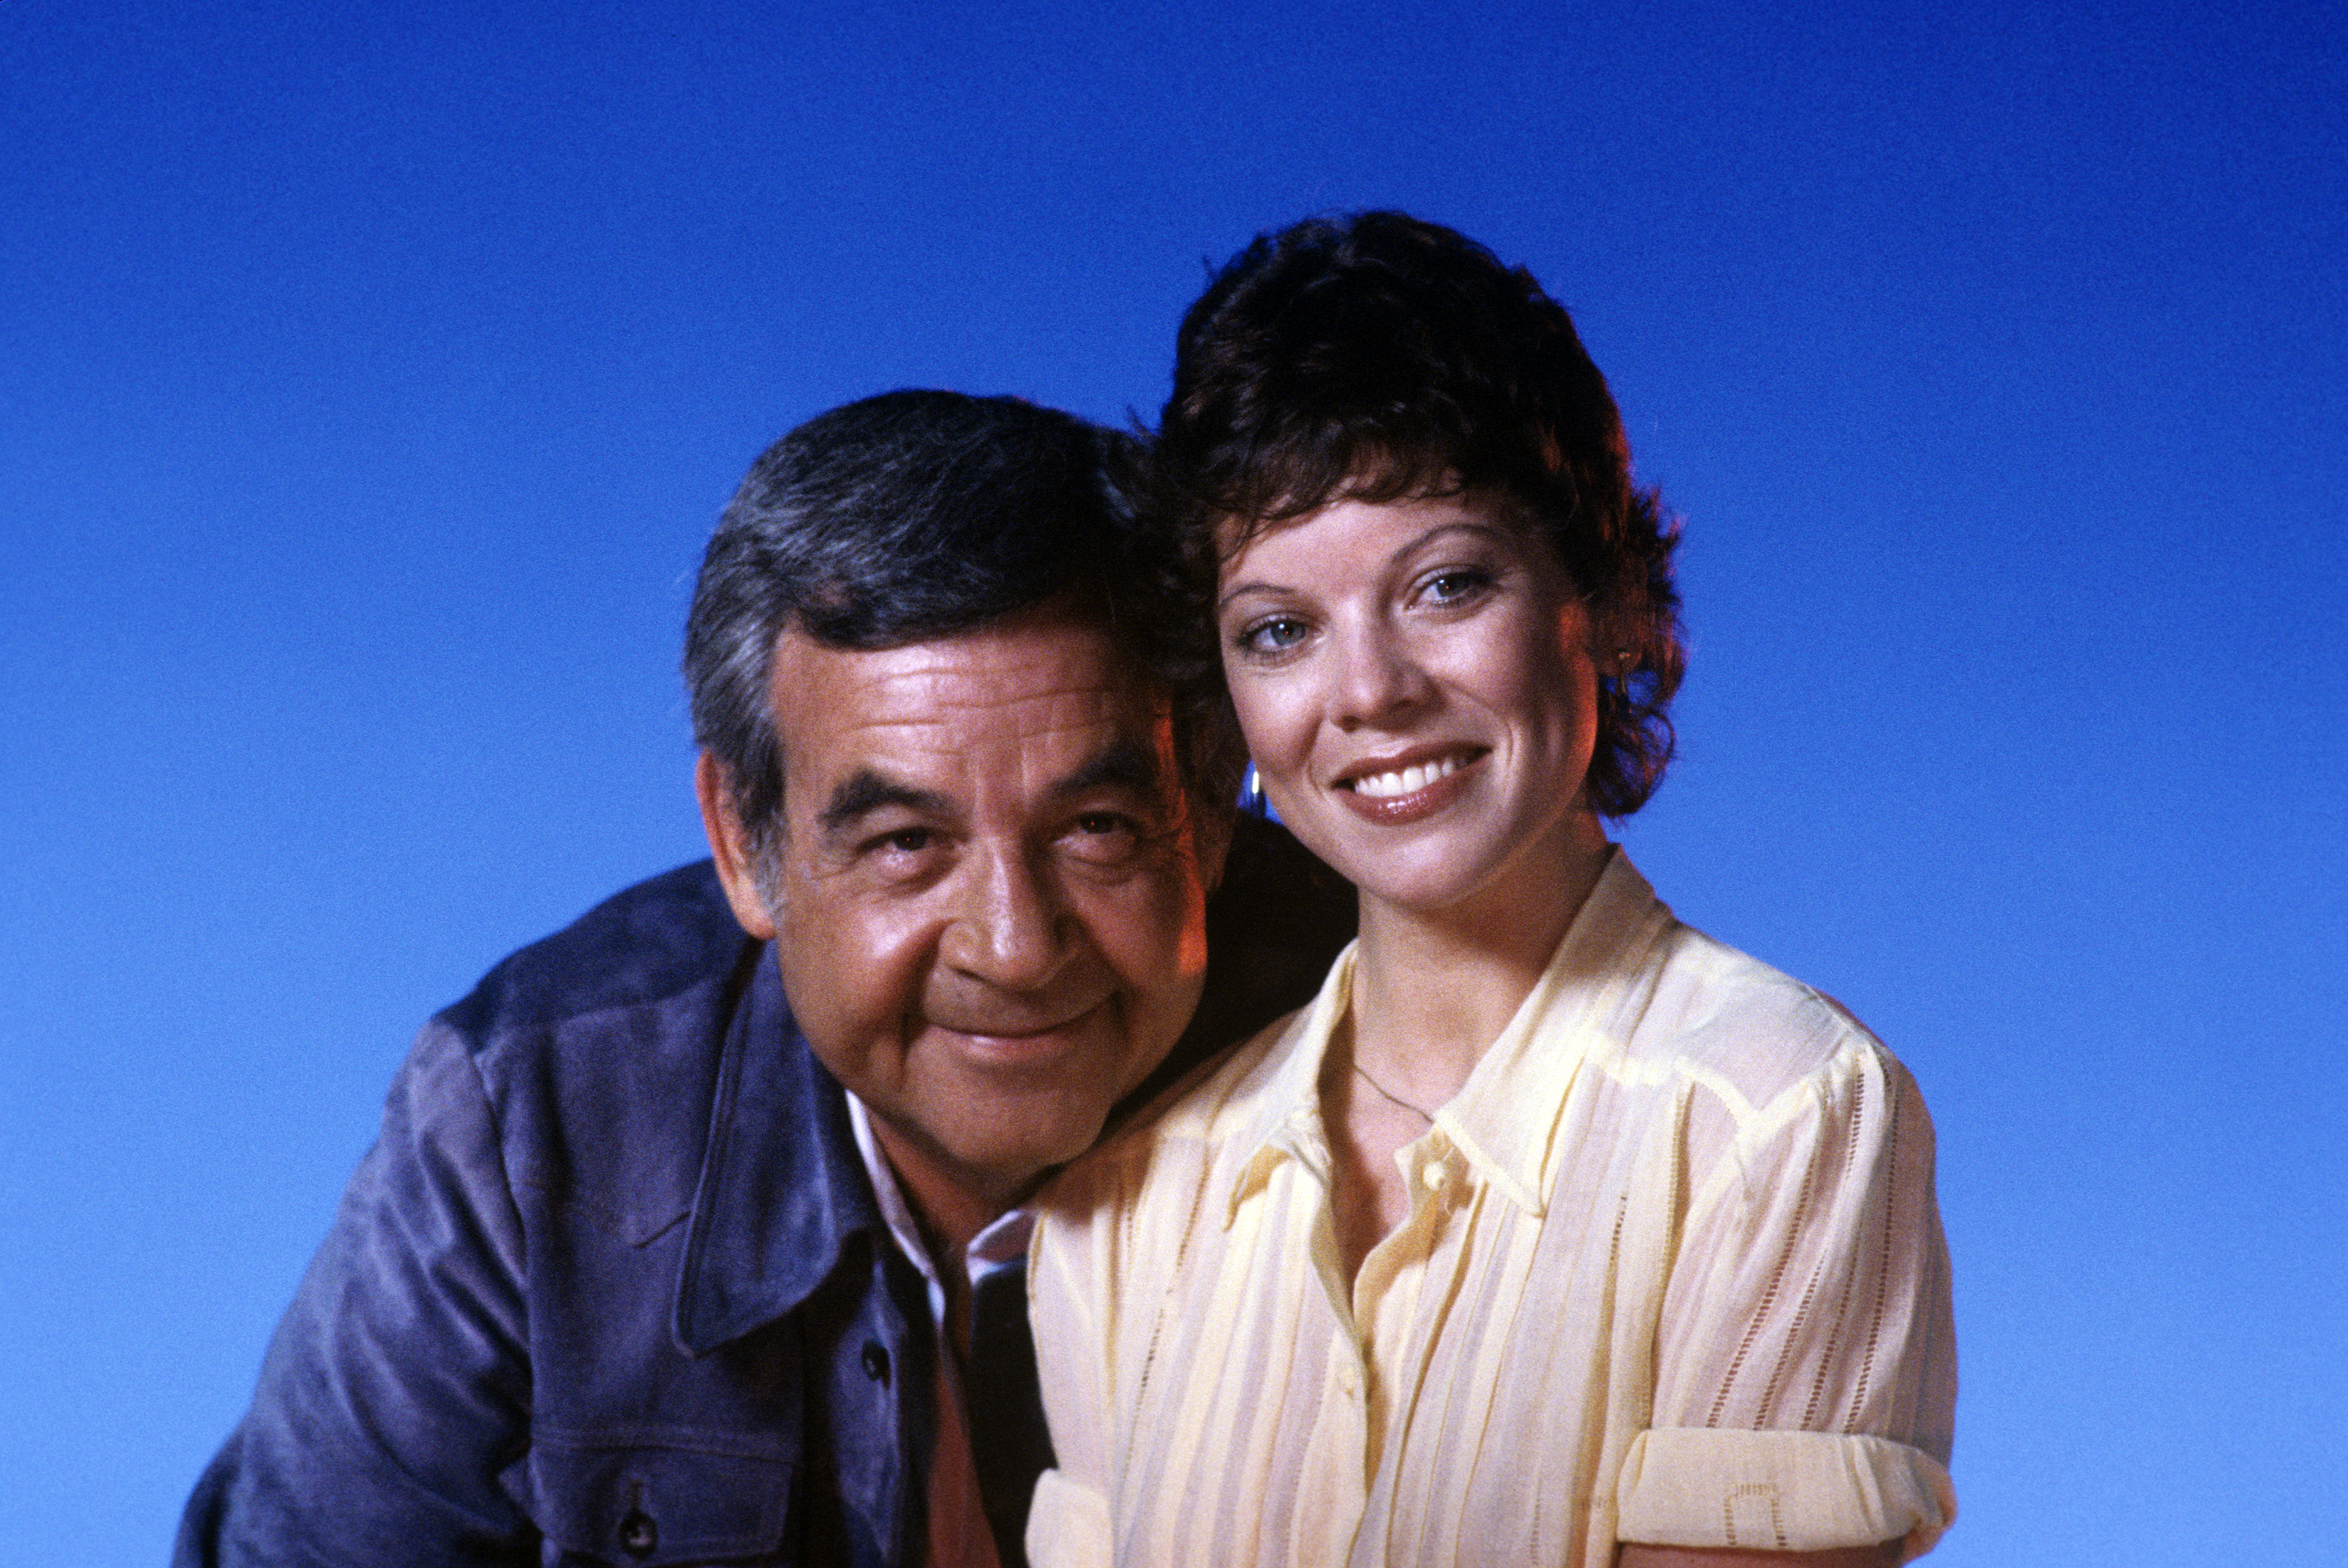 Actor Tom Bosley and actress Erin Moran on the set of "Happy Days" in 1981 | Source: Getty Images